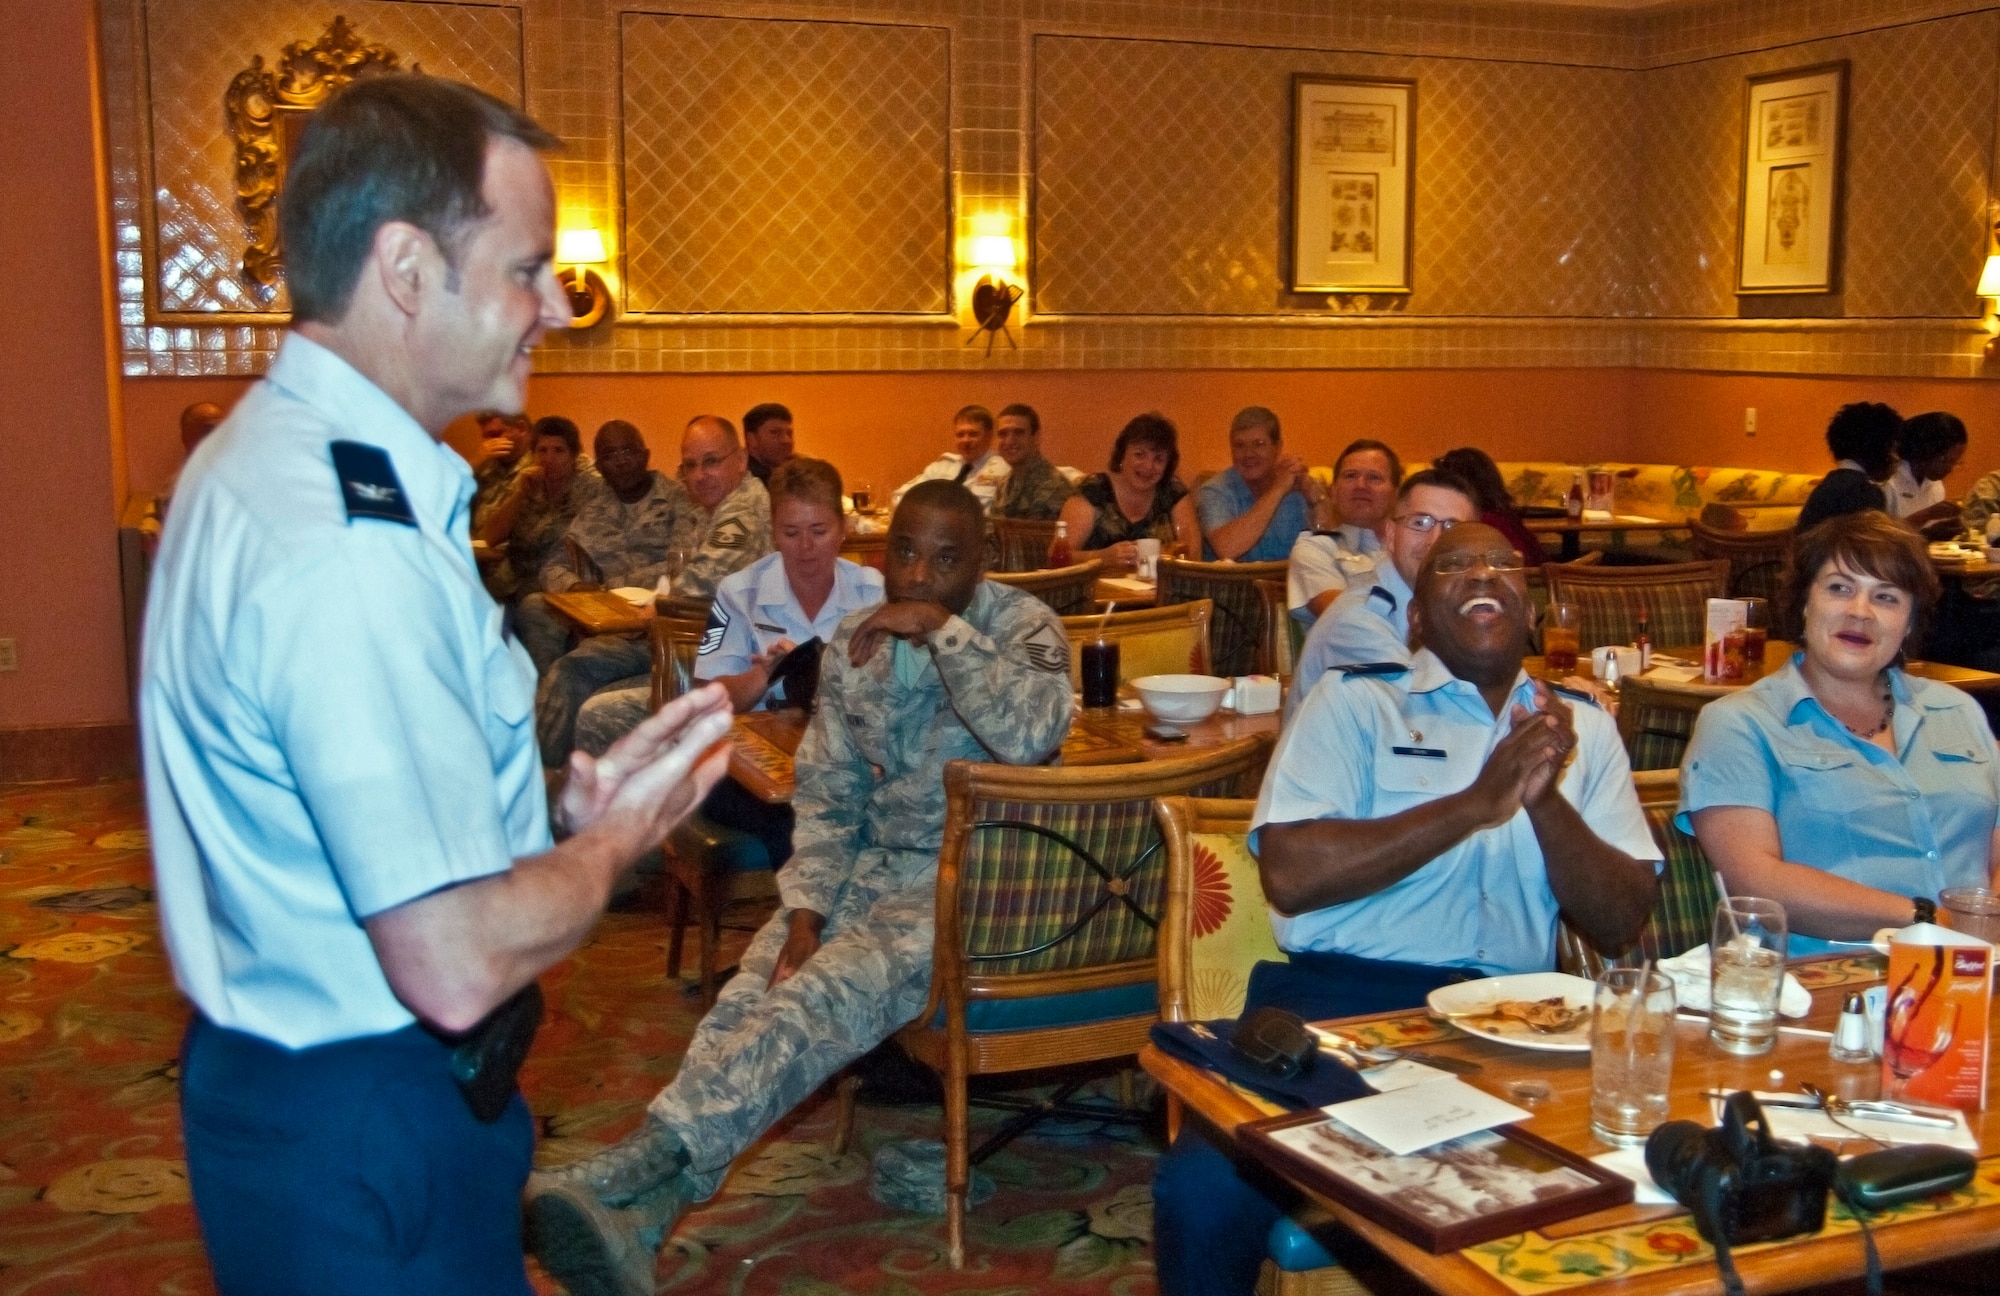 Col. Louis Patriquin, 403rd Operations Group commander, shares his fond memories and funny stories of Col. Marshall Irvin, 403rd Mission Support Group commander, at  Colonel Irvin's going away luncheon held at the Beau Rivage Resort and Casino, Biloxi, Miss., March 21.  Colonel Irvin recently began his new assignment as the 94th Airlift Wing Mission Support Group commander, Dobbins Air Force Base, Ga.  Colonel Irvin served with Reservists from the 403rd Wing from August 2009 to March 2011. (U.S. Air Force photo by Tech. Sgt. Tanya King)